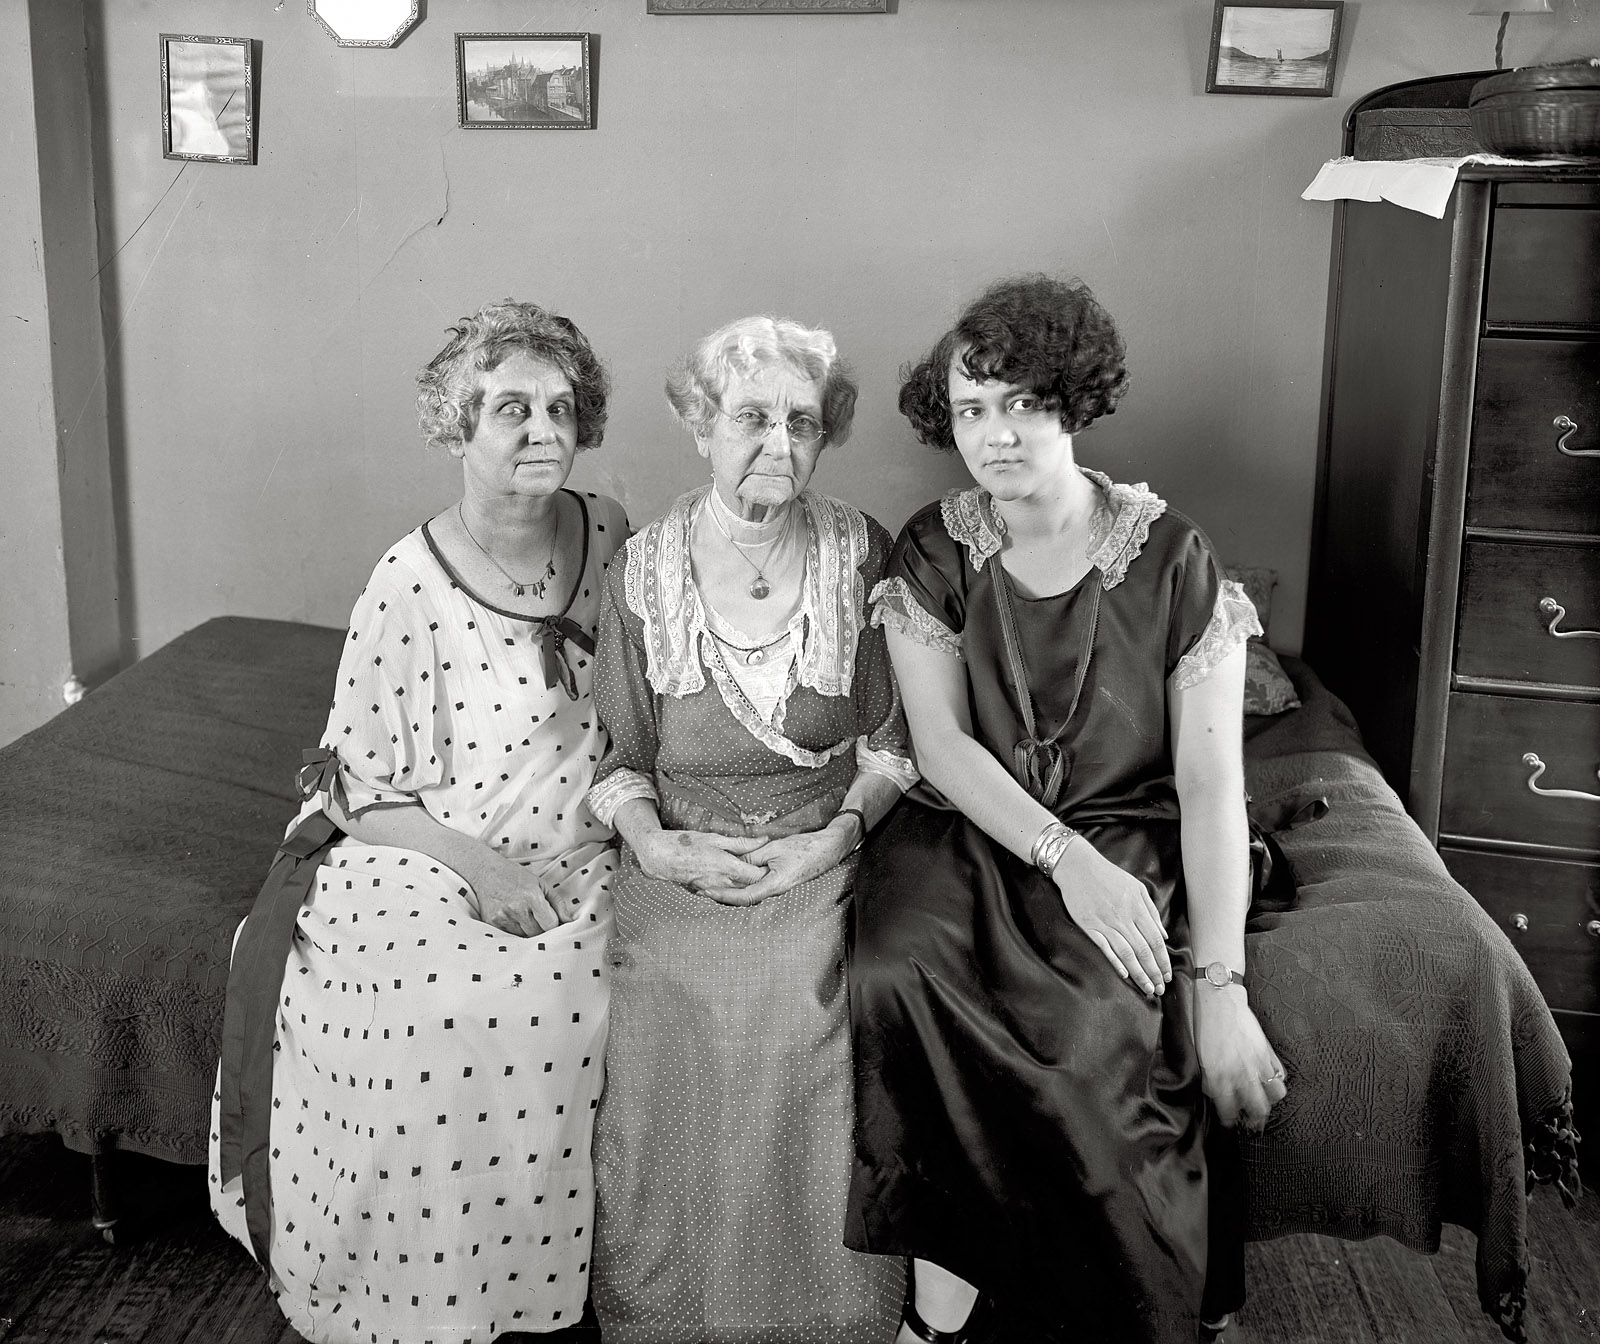 August 12, 1924. "Dr. Cora Smith King, Mrs. Emma Barnes Smith, Mrs. Sylvia Smith King." Dr. King, who was active in the women's suffrage movement, with her mother and daughter in a photo taken to illustrate a newspaper article headlined WOMAN OF 80 BOBS HAIR. National Photo glass negative. View full size.